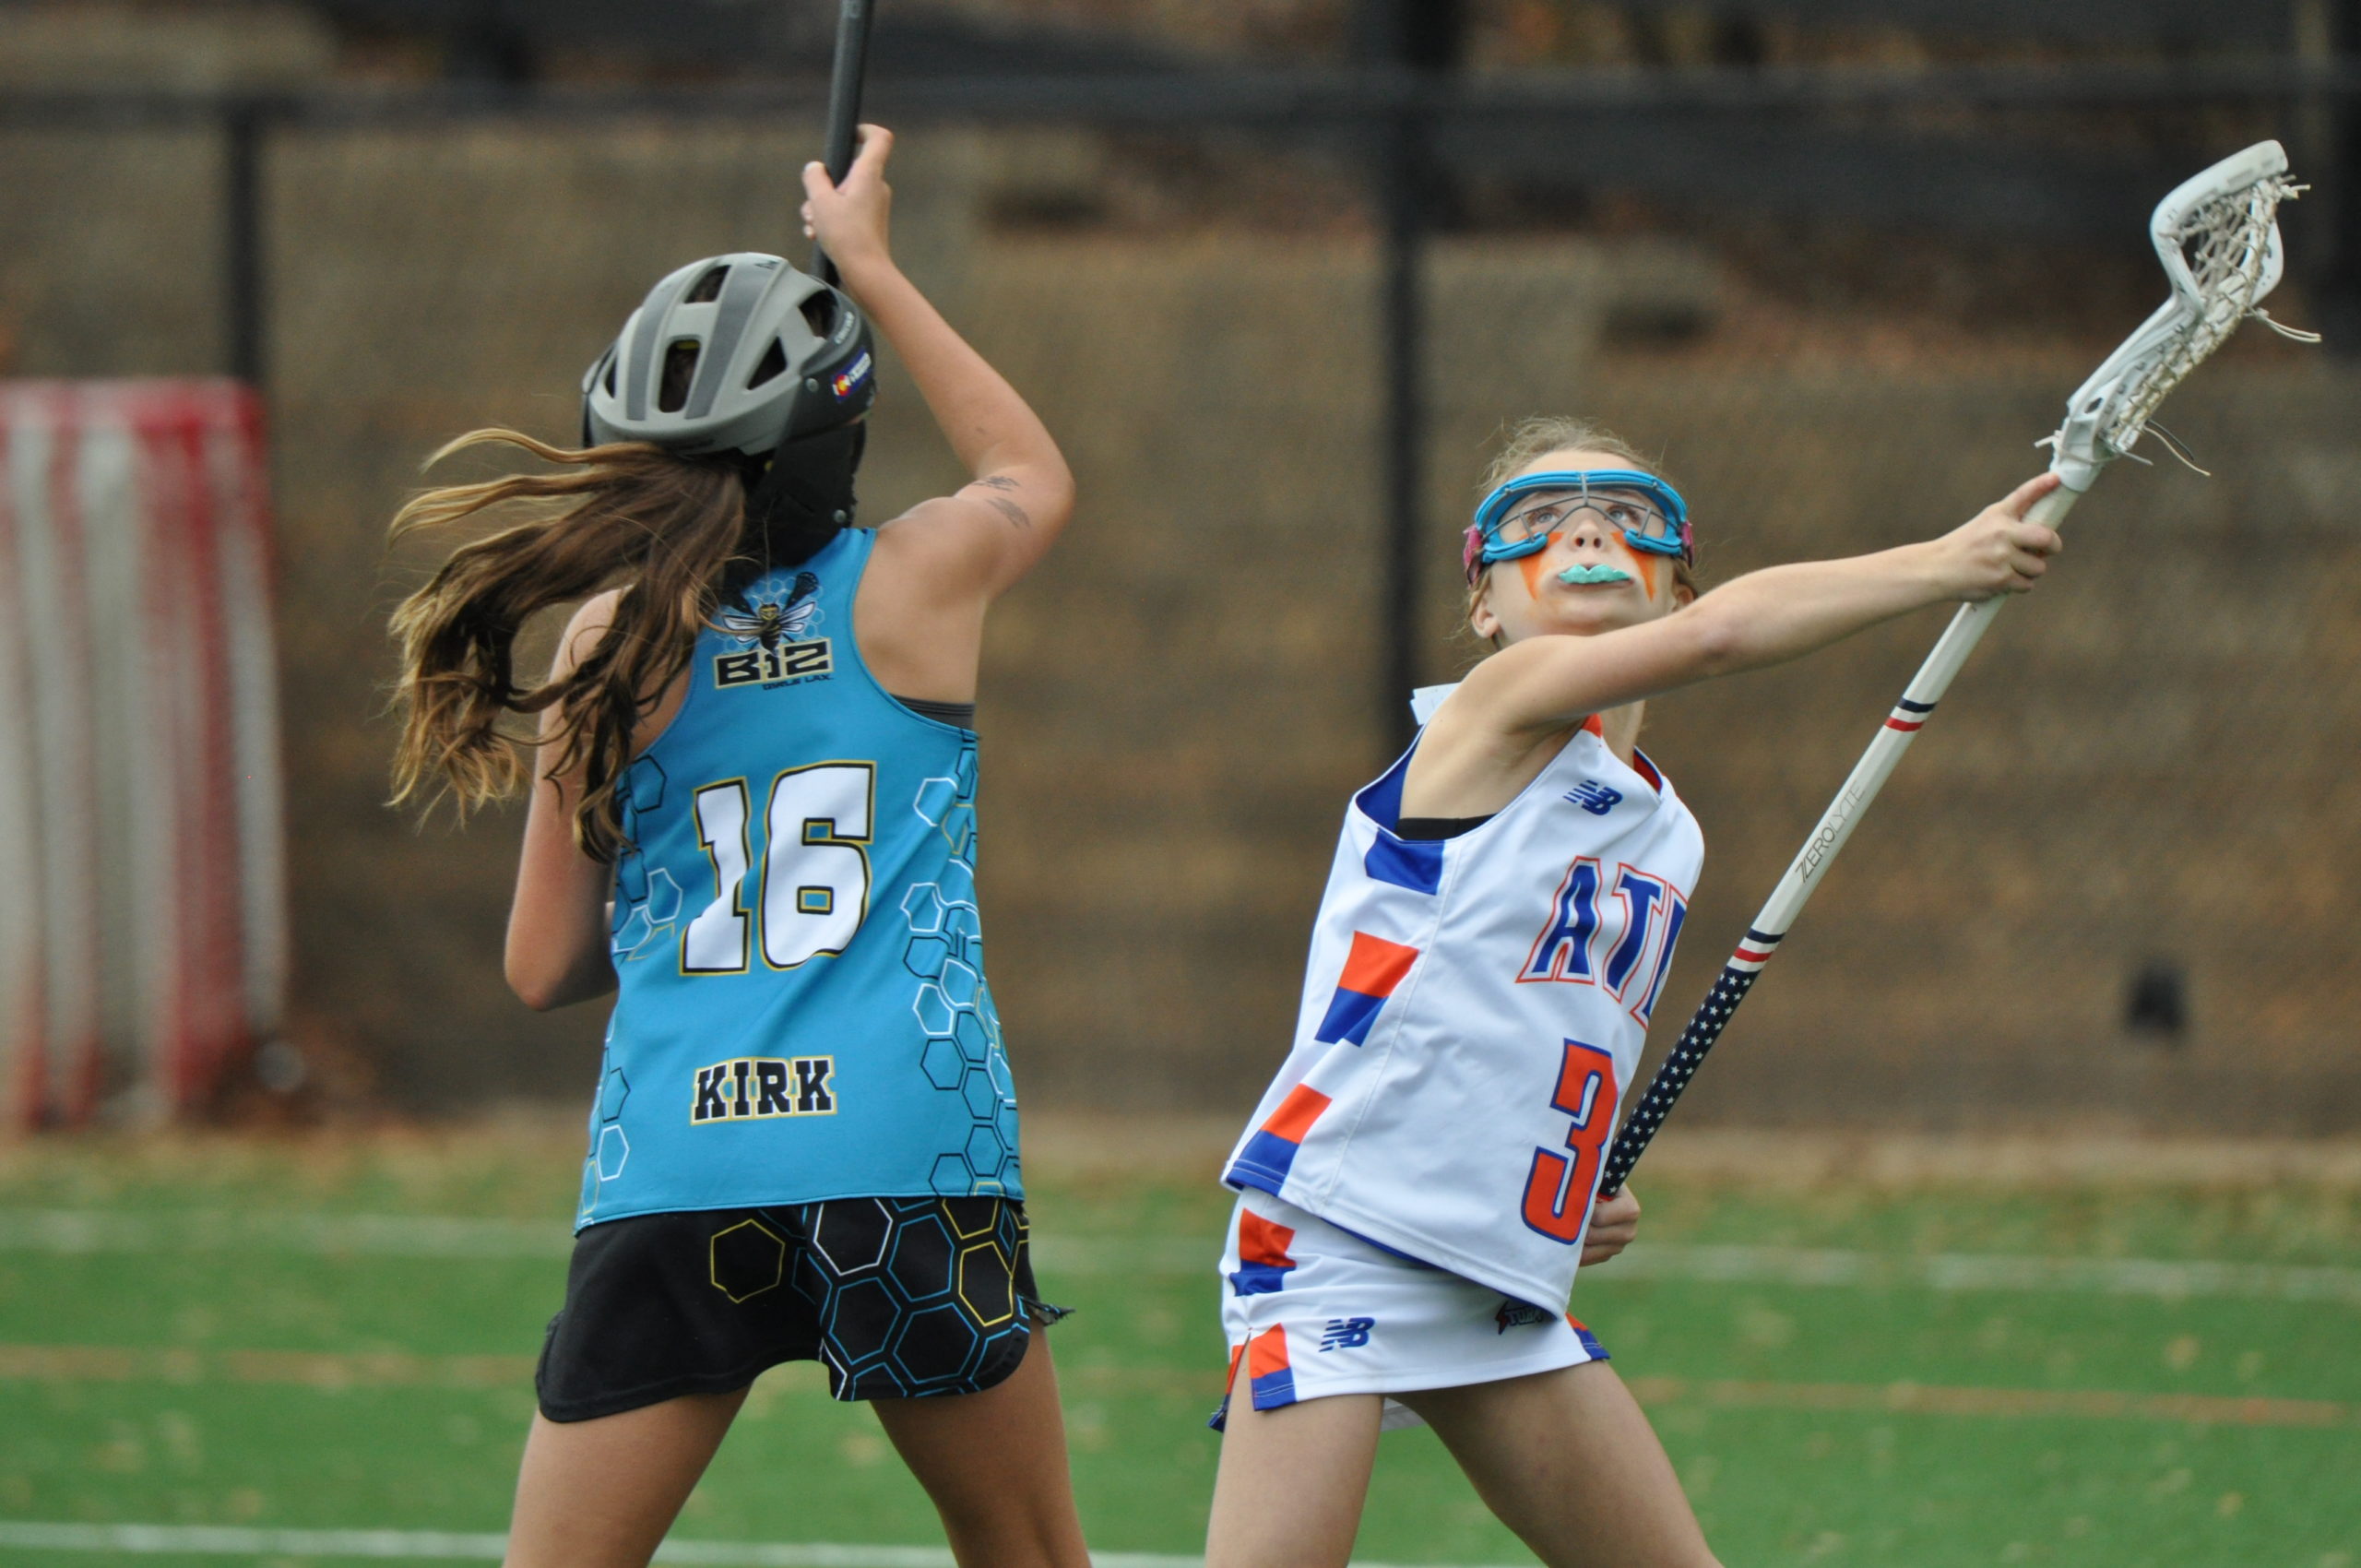 The Knockout powered by Top Threat Tournaments. A premier girls lacrosse recruiting event near Atlanta, Georgia